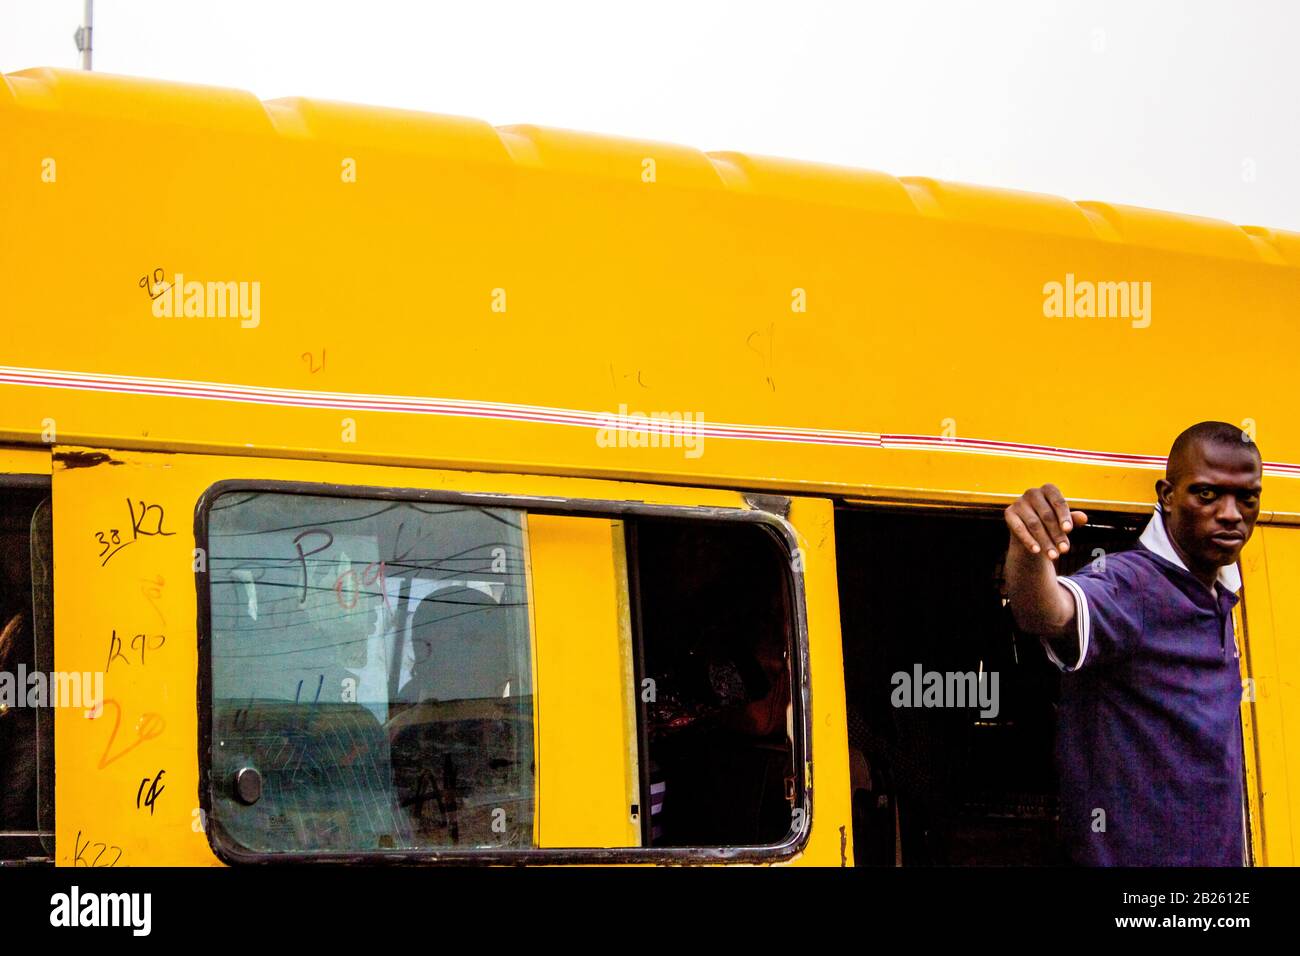 A danfo bus conductor calls out to passengers on a street in Lagos, Nigeria. Stock Photo